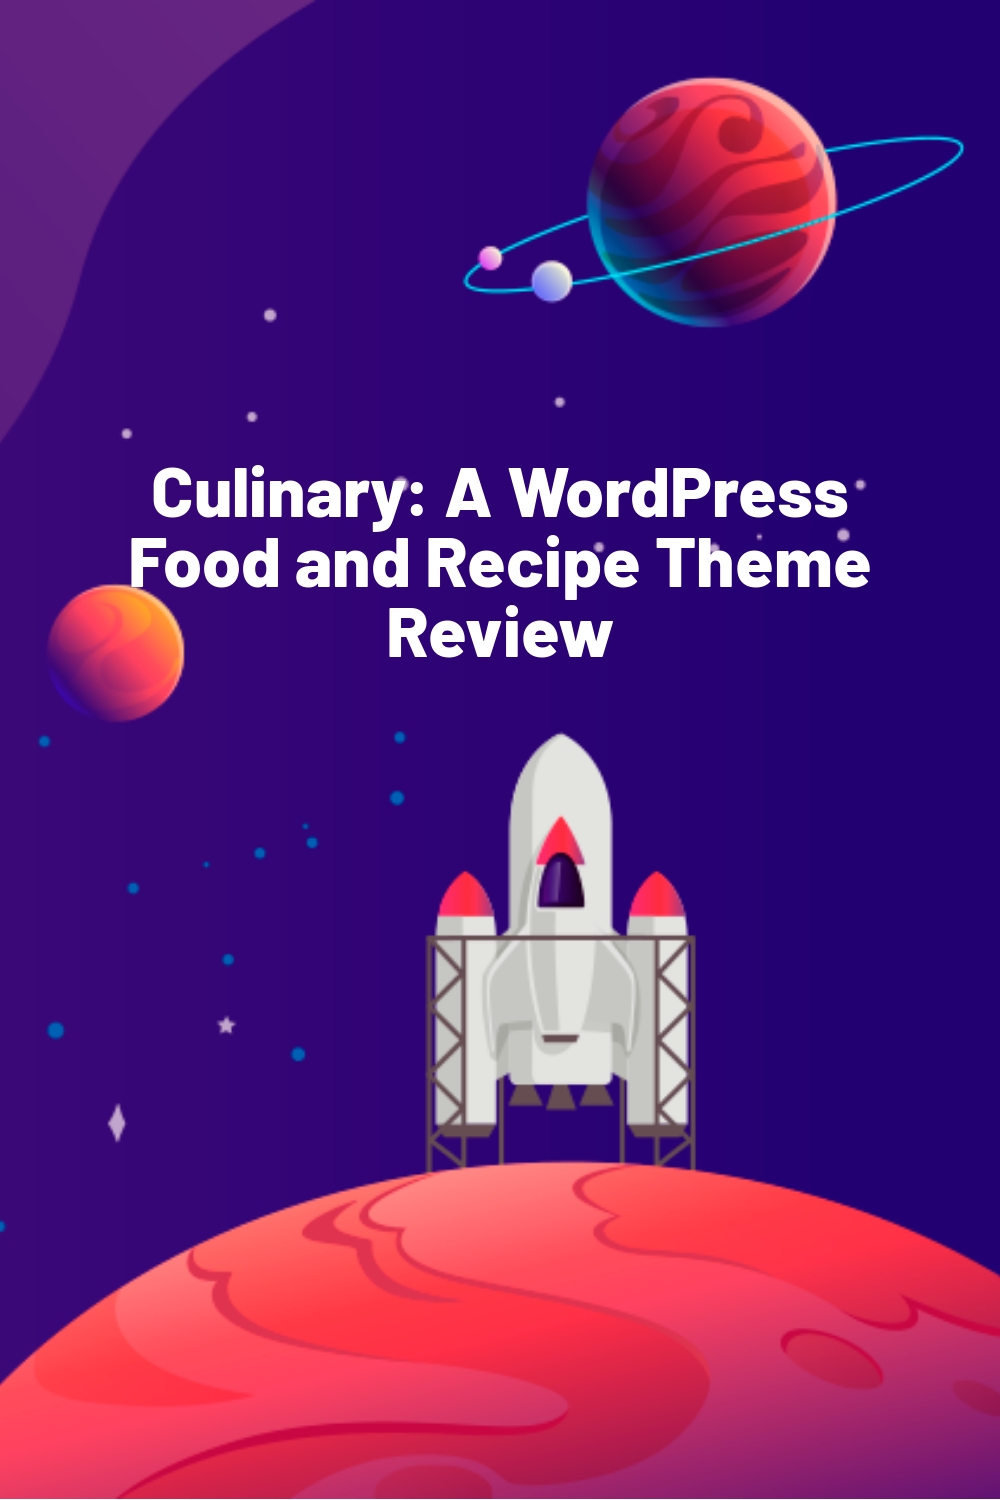 Culinary: A WordPress Food and Recipe Theme Review